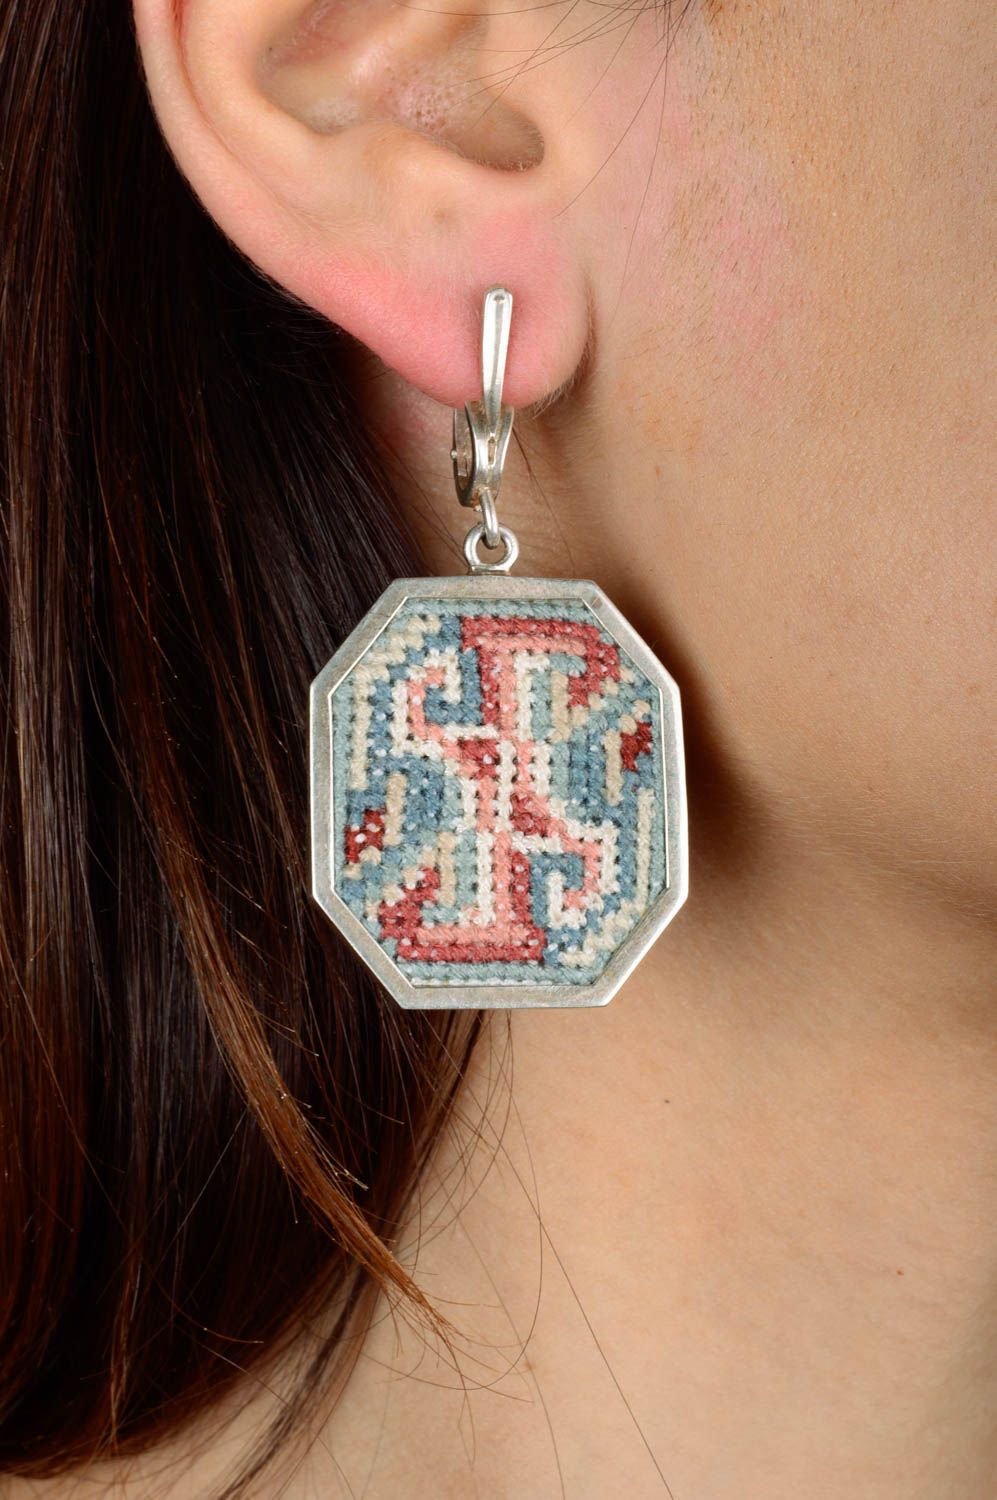 Handmade earrings with embroidery silver earrings with charms designer accessory photo 2